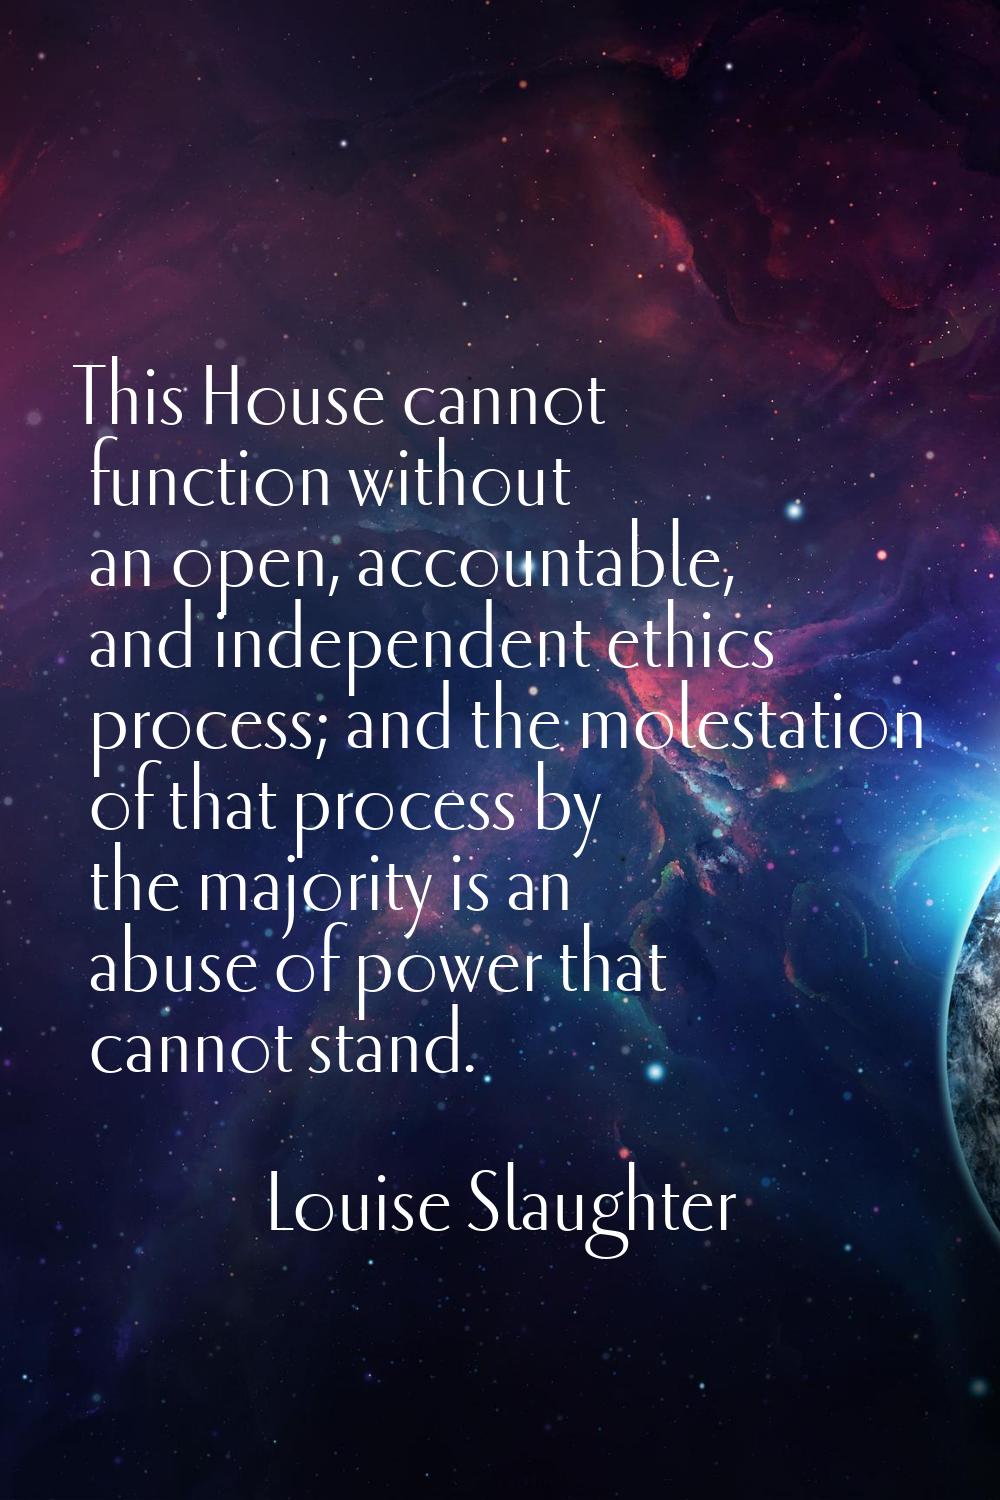 This House cannot function without an open, accountable, and independent ethics process; and the mo